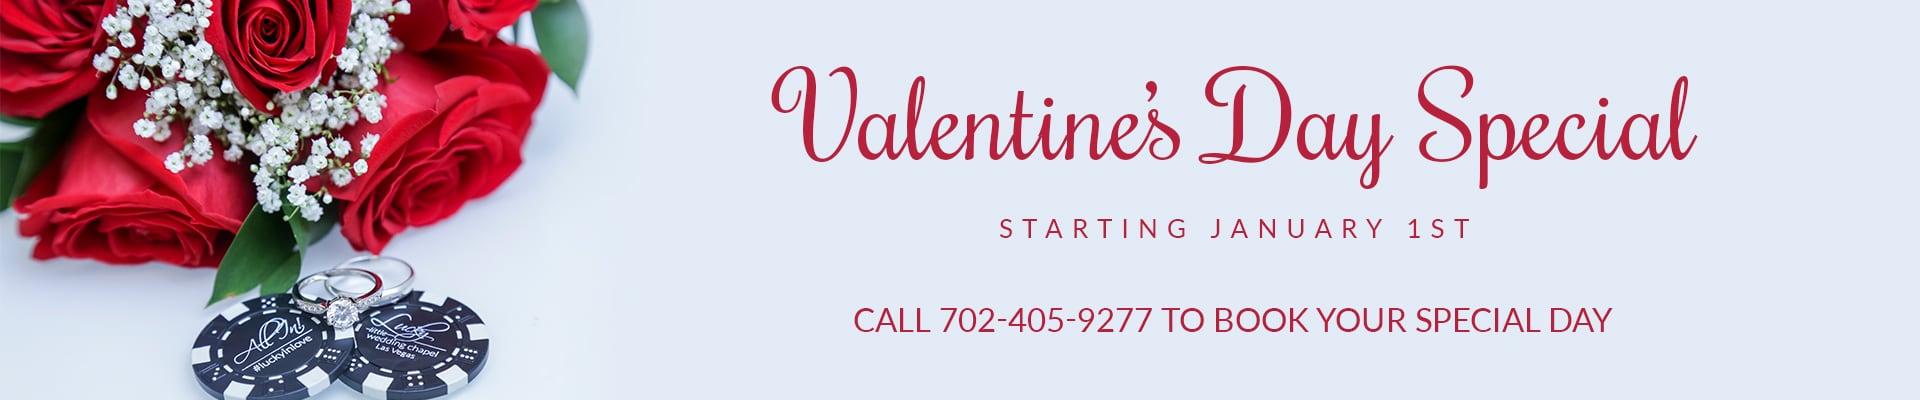 Valentine's Day Special Landing Page Banner